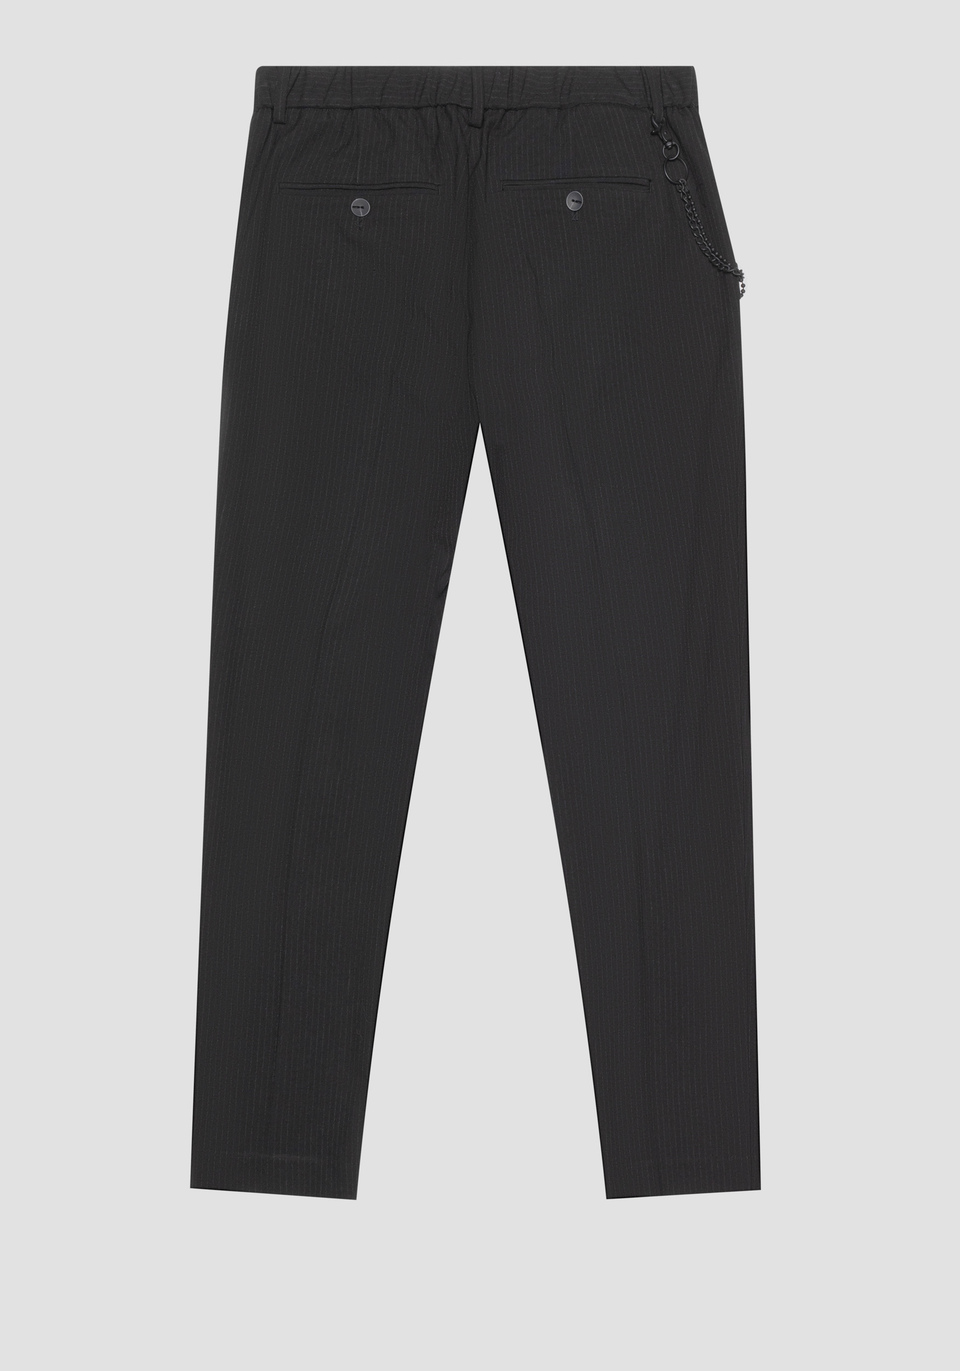 "RAD" SLIM FIT ANKLE-LENGTH TROUSERS IN STRETCH VISCOSE BLEND FABRIC WITH PINSTRIPE PATTERN - Antony Morato Online Shop